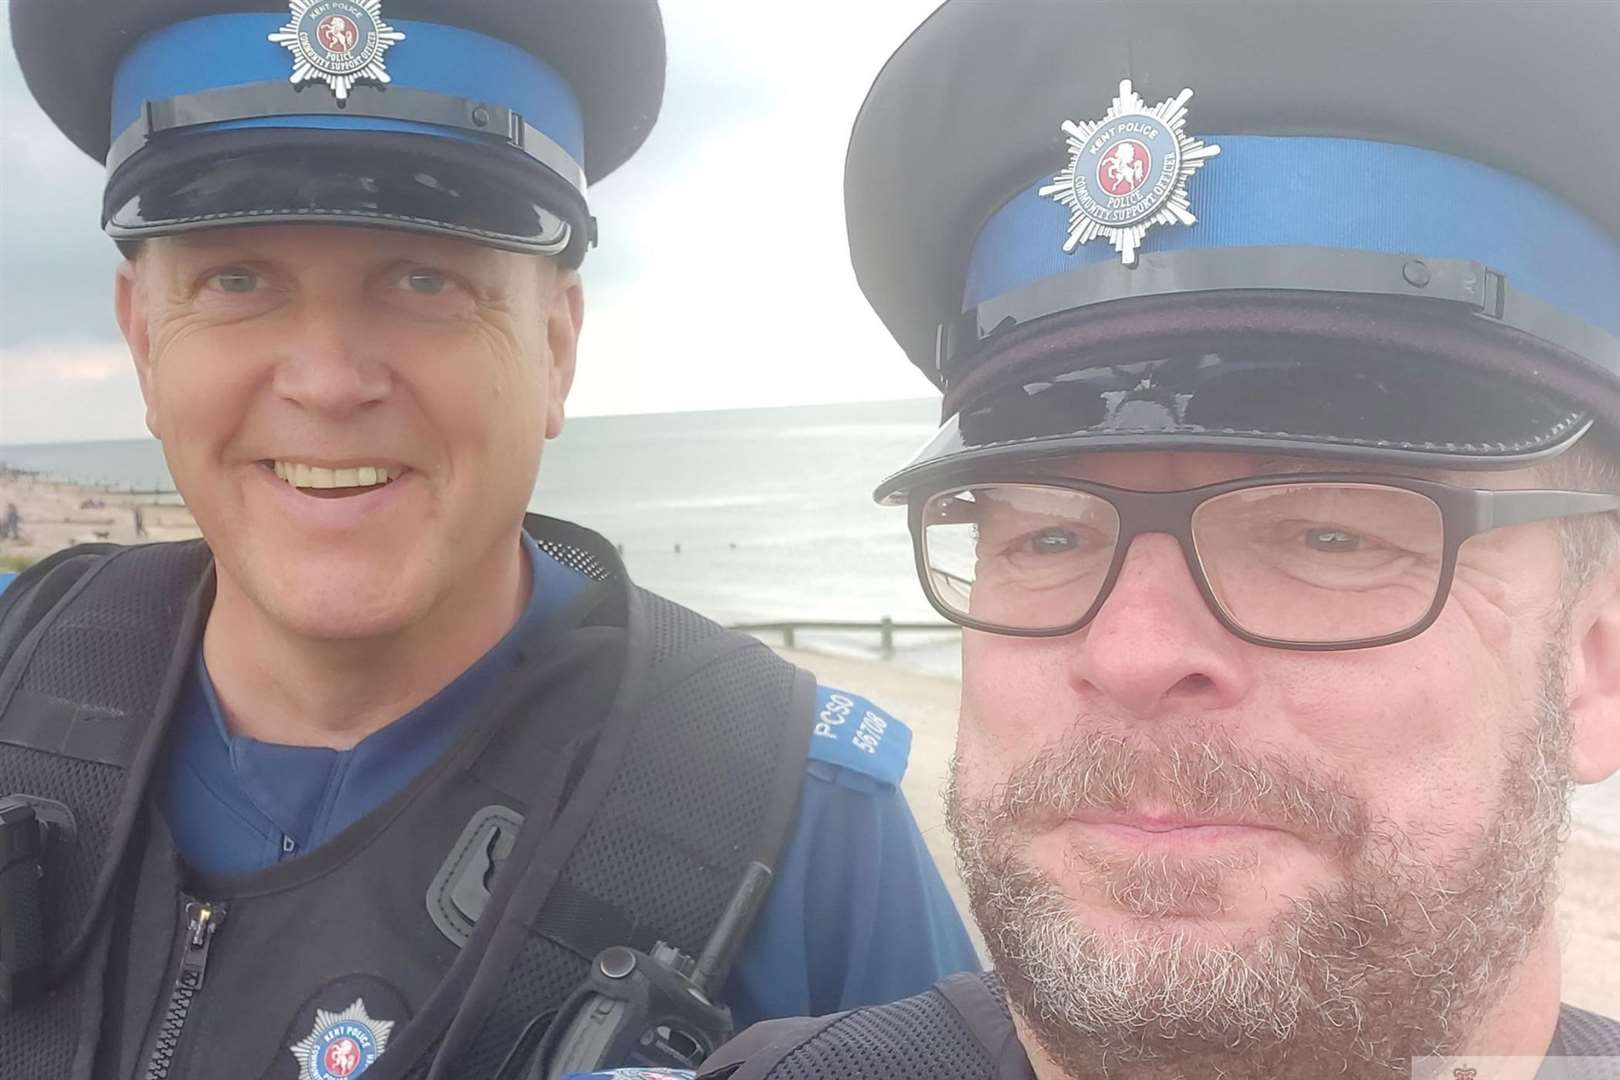 PCSO's John Cork (L) and Lee Fennell (R). Photo: Kent Police